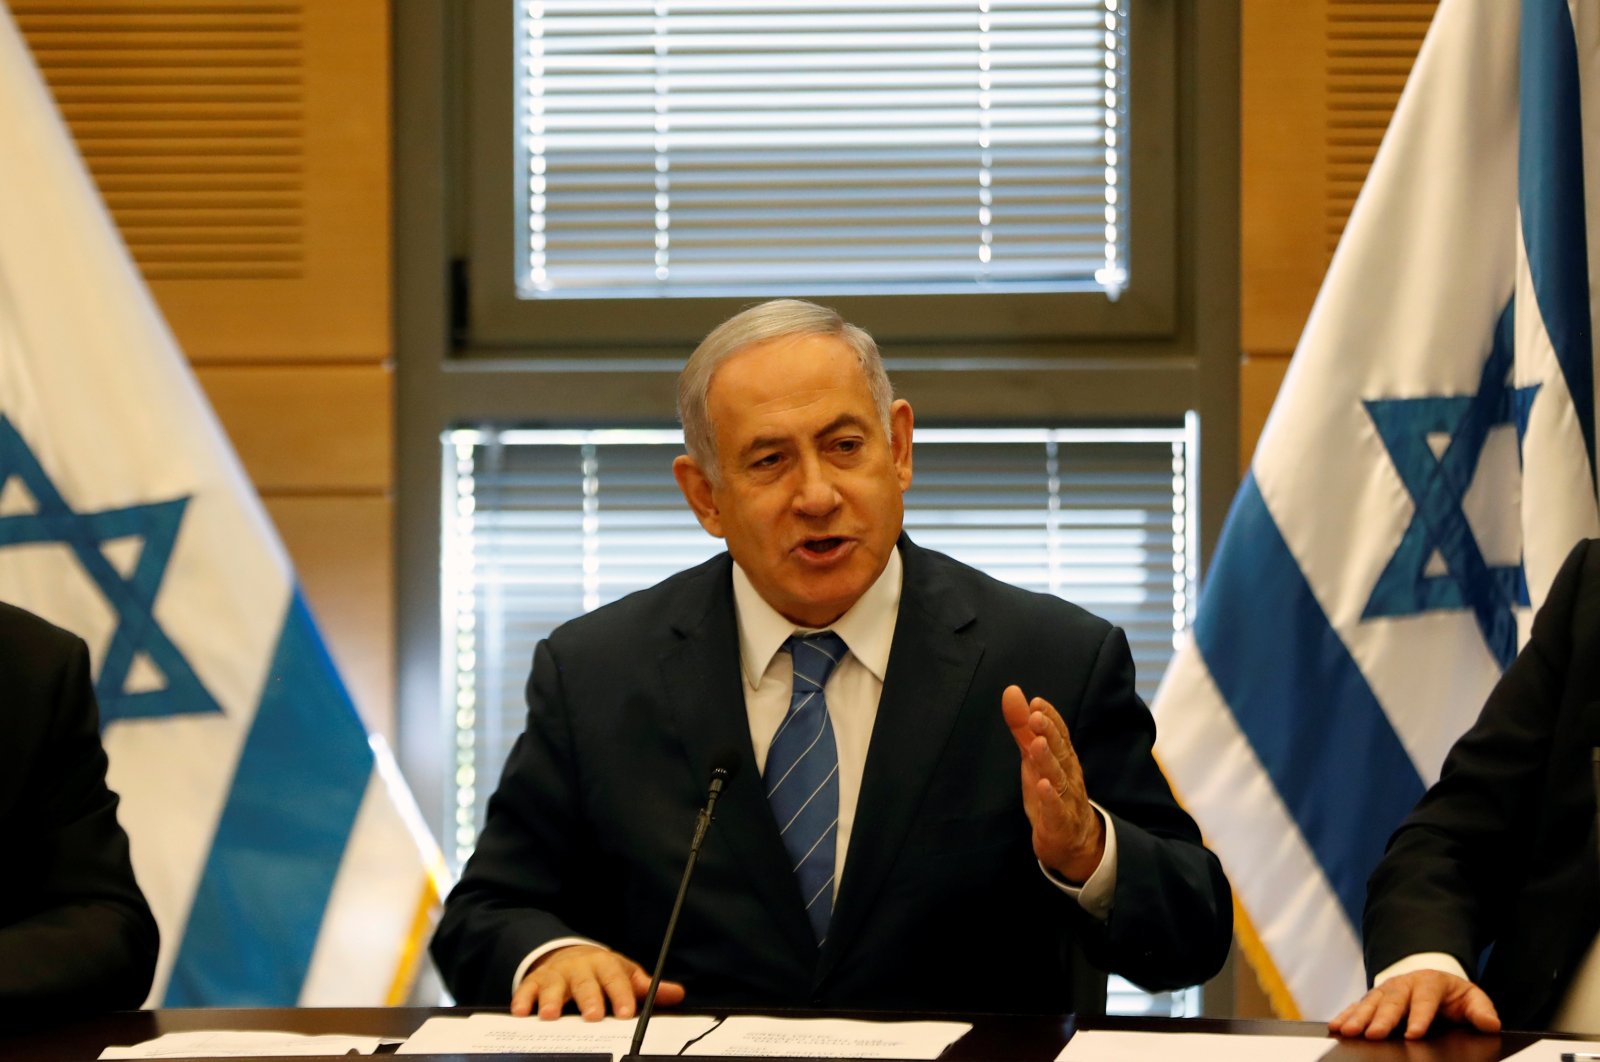 Israeli Prime Minister Benjamin Netanyahu delivers a statement to the media at the start of his Likud party faction meeting at the Knesset, Israel's parliament, in Jerusalem, Sept. 23, 2019. (Reuters Photo)